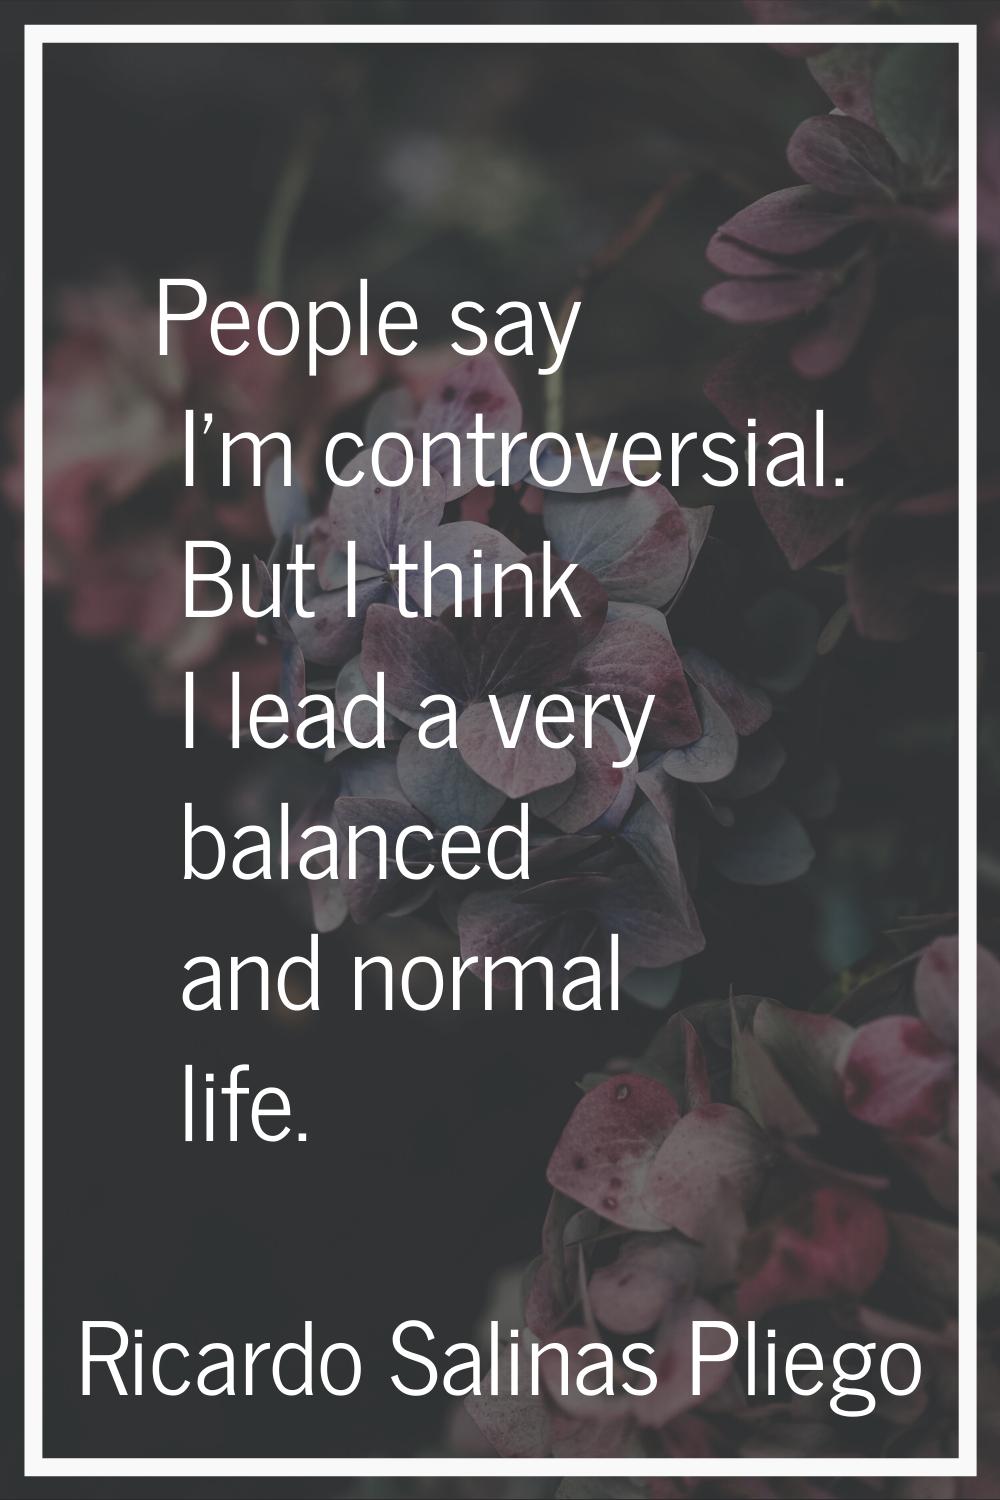 People say I'm controversial. But I think I lead a very balanced and normal life.